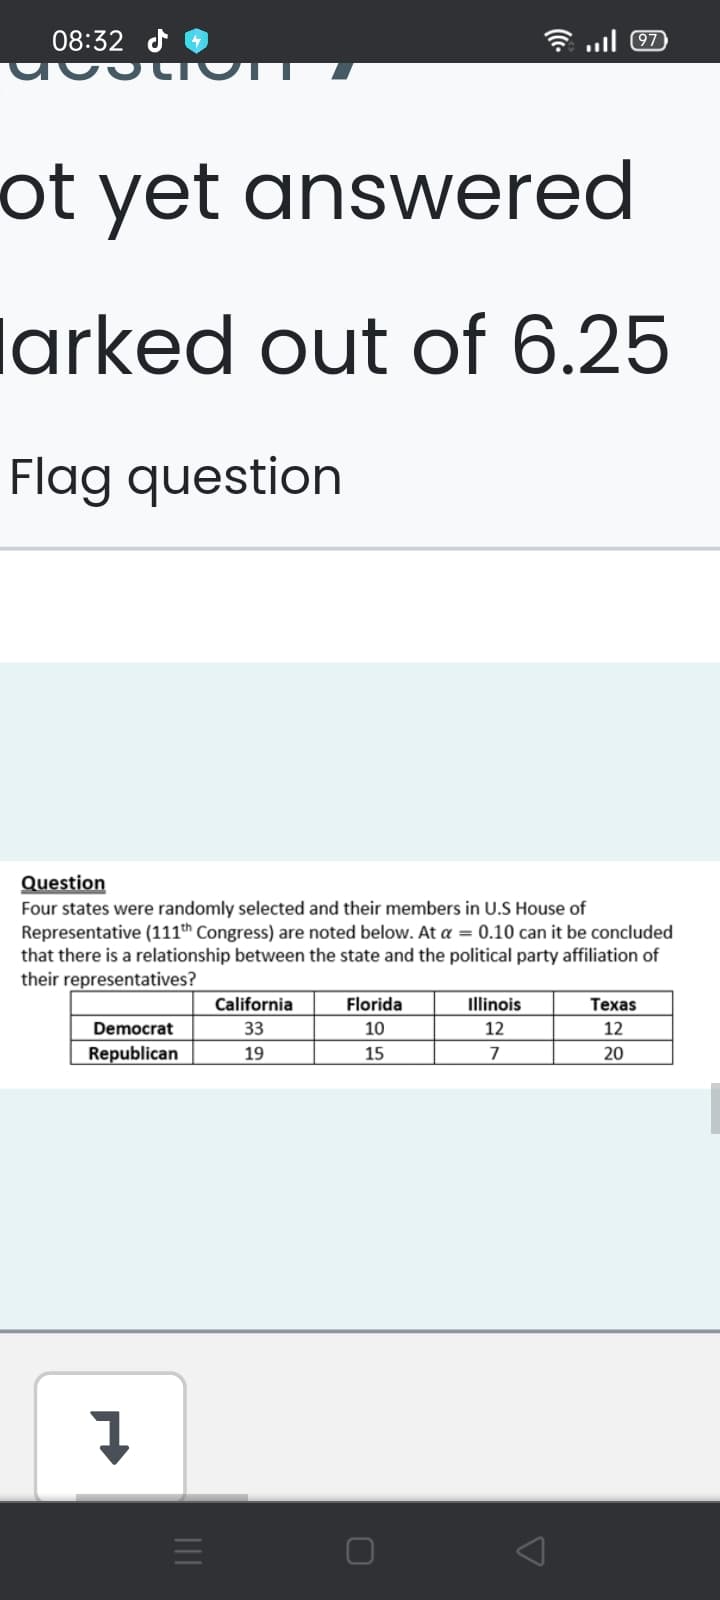 08:32 d
97
ot yet answered
larked out of 6.25
Flag question
Question
Four states were randomly selected and their members in U.S House of
Representative (111th Congress) are noted below. At a = 0.10 can it be concluded
that there is a relationship between the state and the political party affiliation of
their representatives?
California
Florida
Illinois
Техas
Democrat
33
10
12
12
Republican
19
15
7
20
